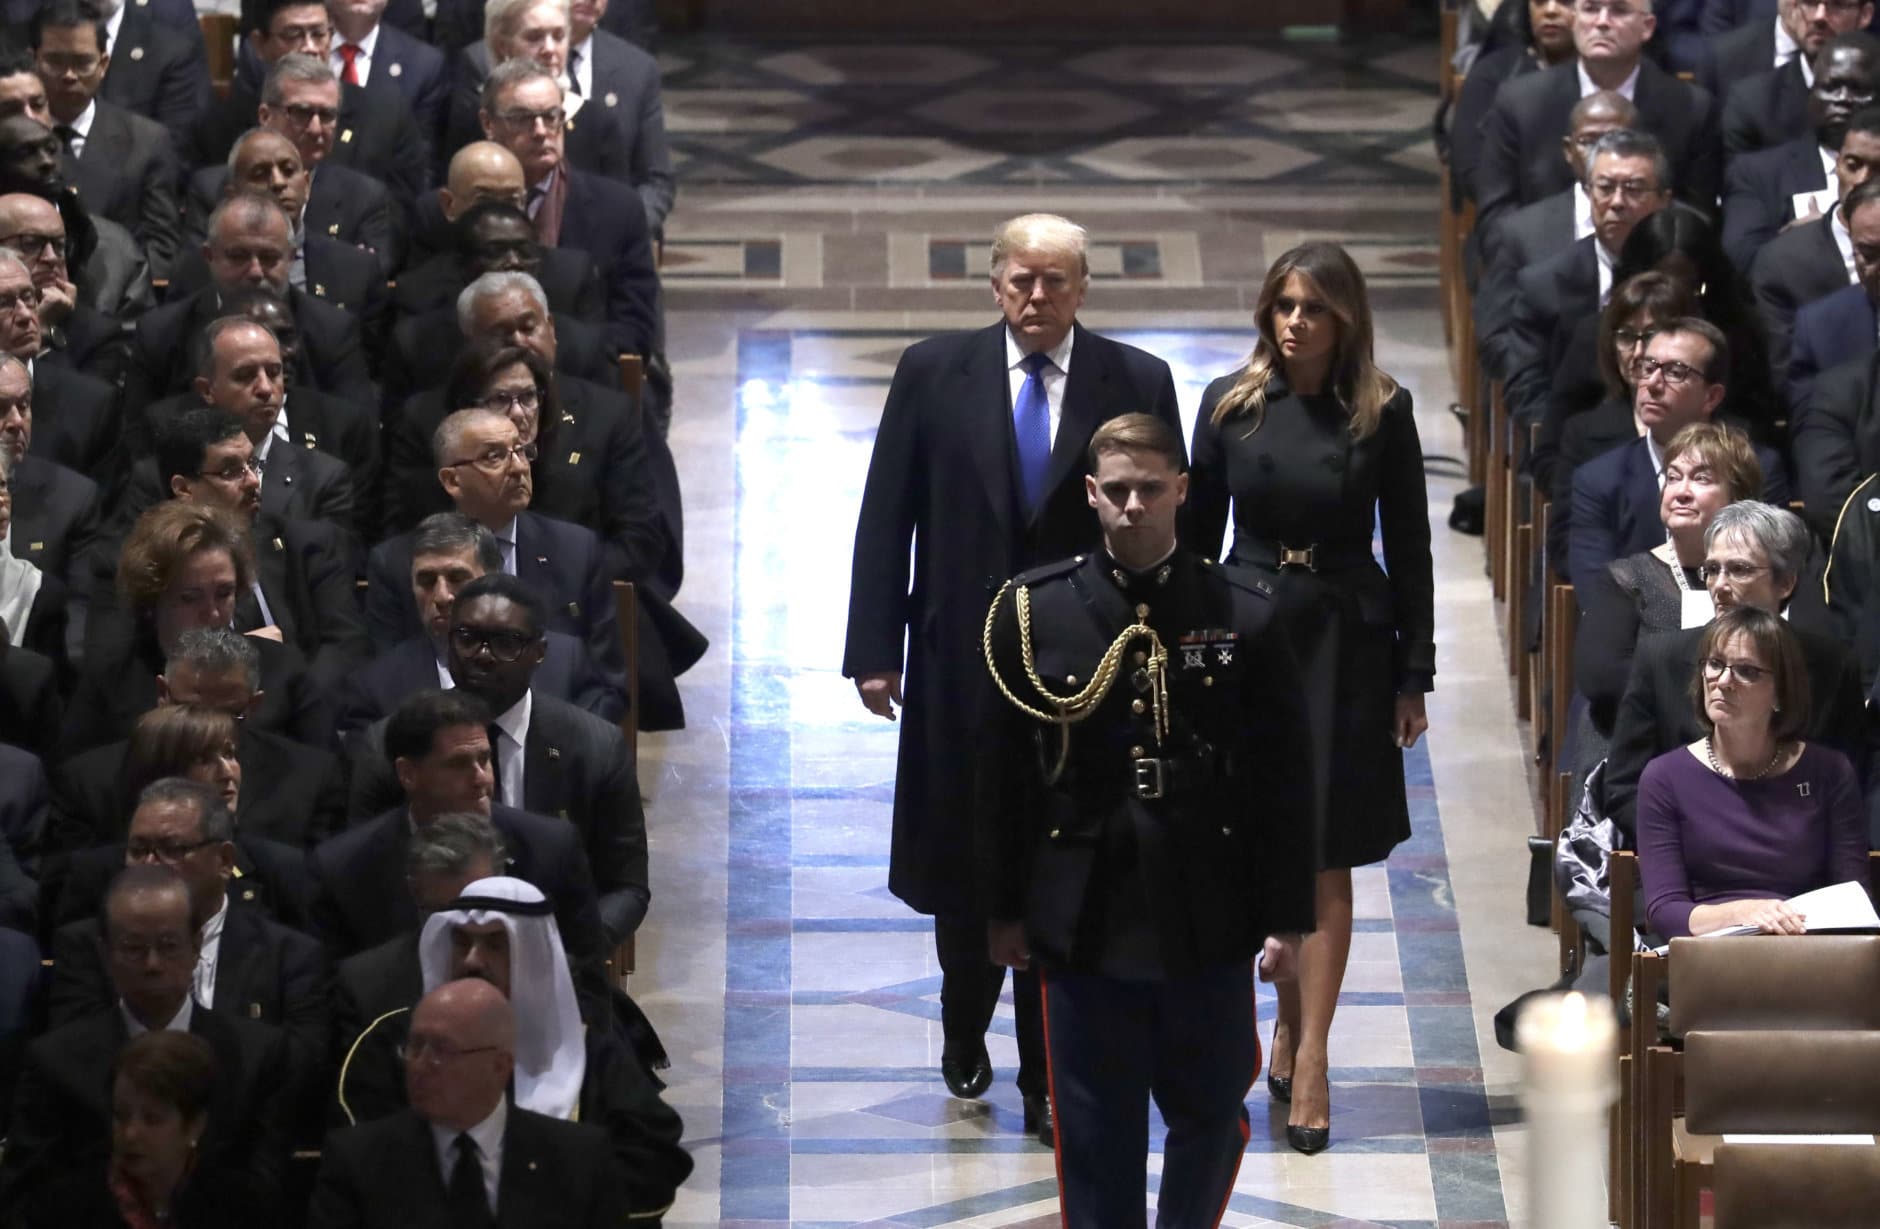 President Donald Trump and first lady Melania Trump arrive for the State Funeral former President George H.W. Bush, at the National Cathedral, Wednesday, Dec. 5, 2018, in Washington. (AP Photo/Evan Vucci)